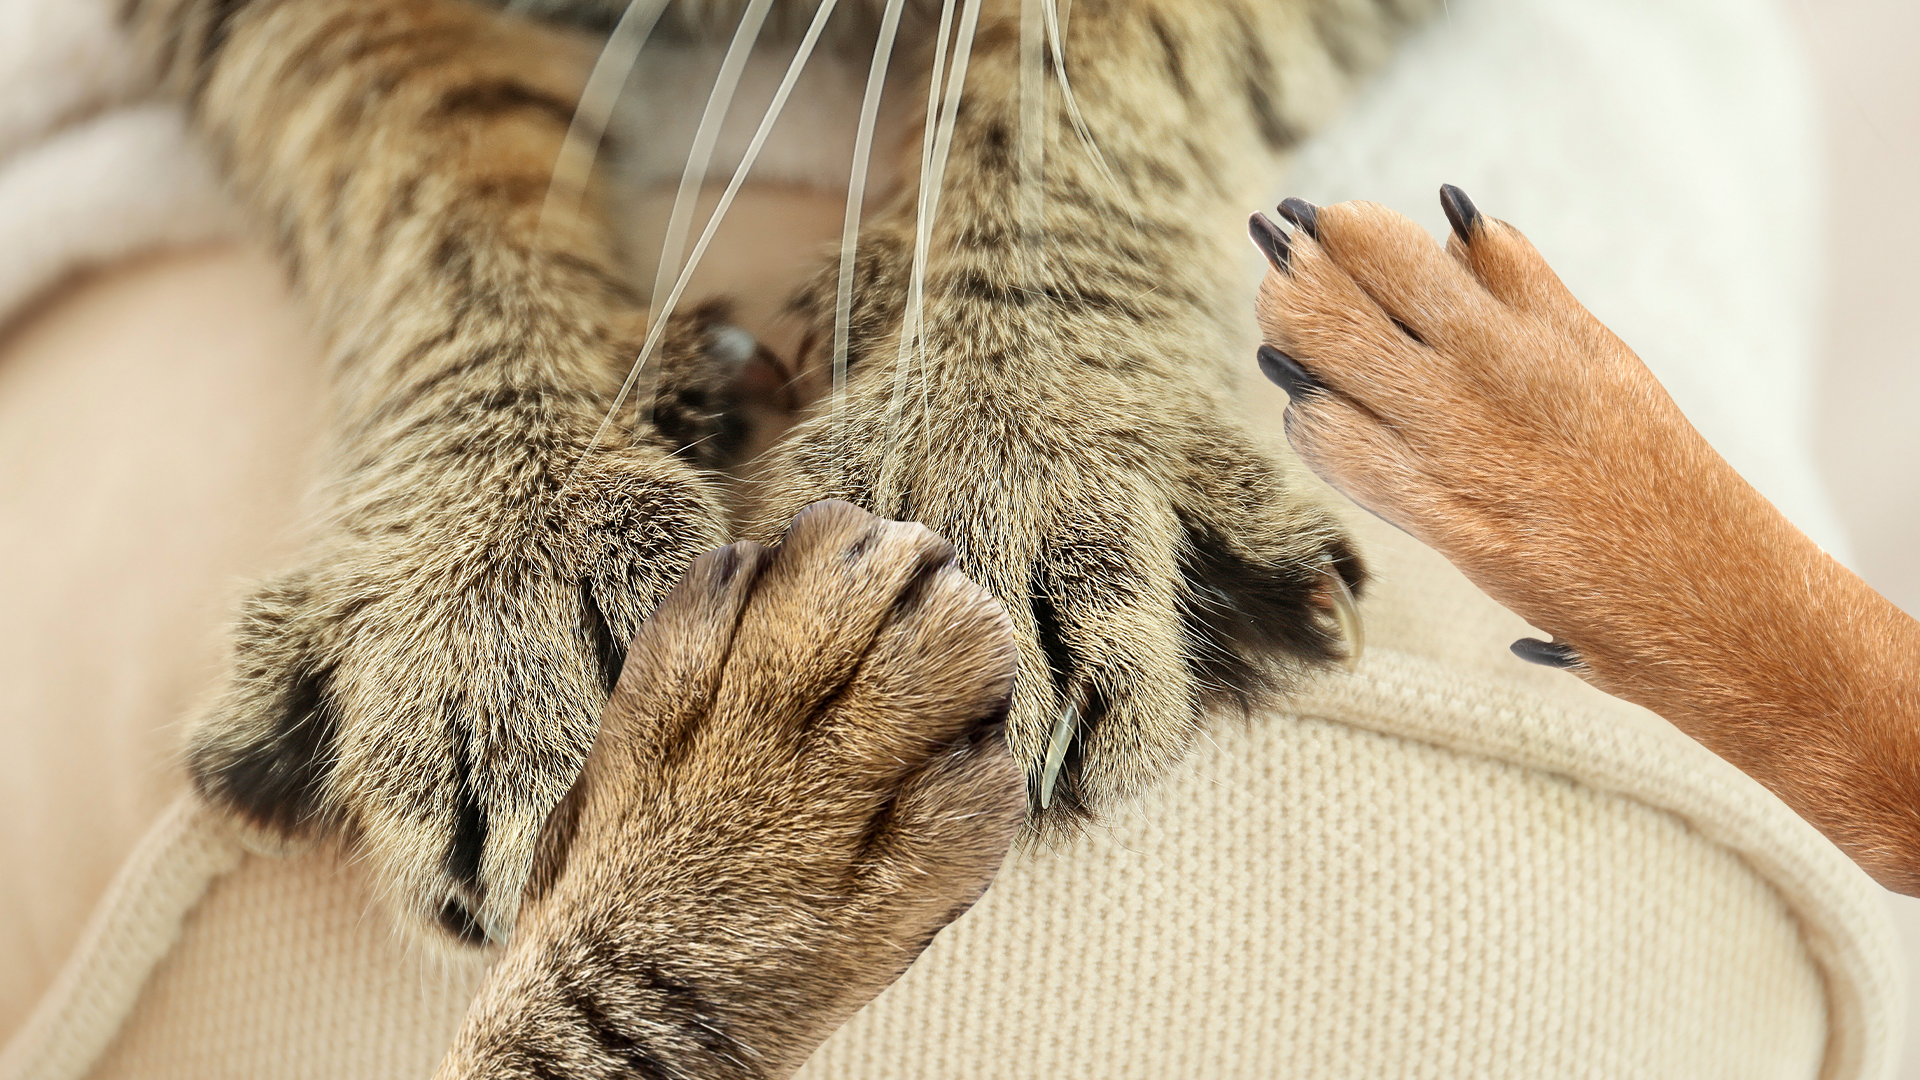 This is an image of cat's paws